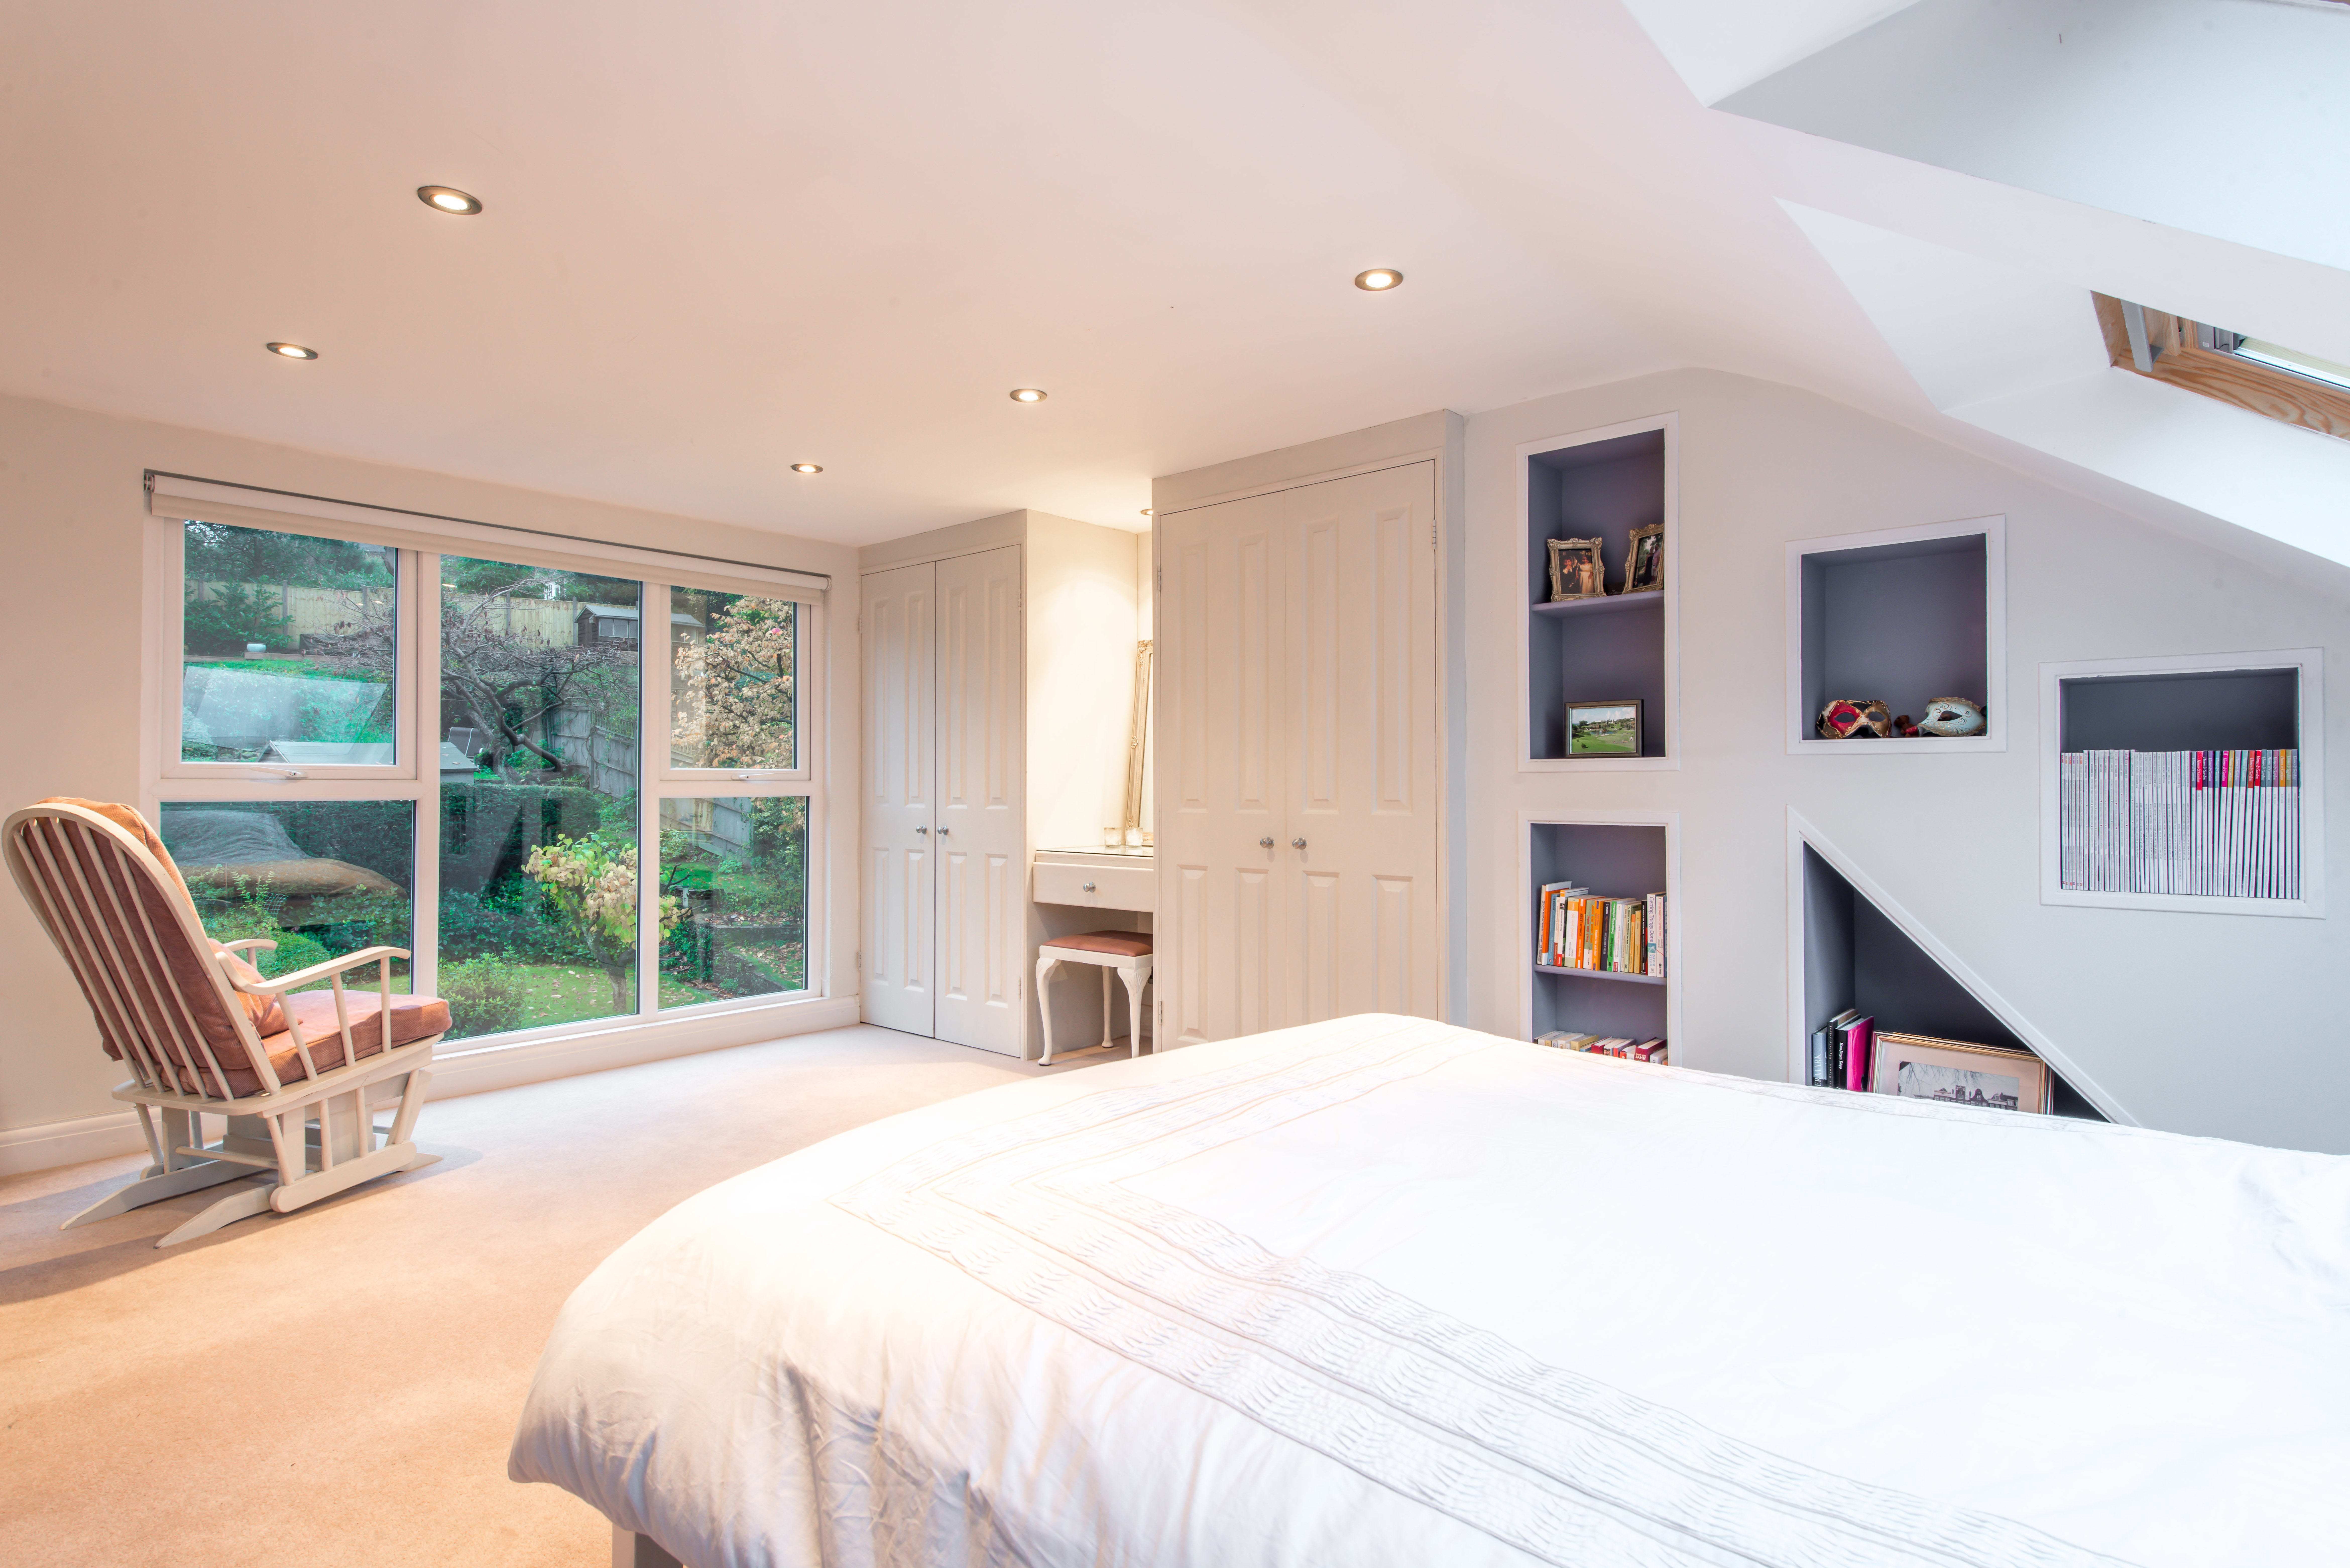 Loft Conversion Costs 2021 And How To, How Much Is It To Turn A Loft Into Bedroom